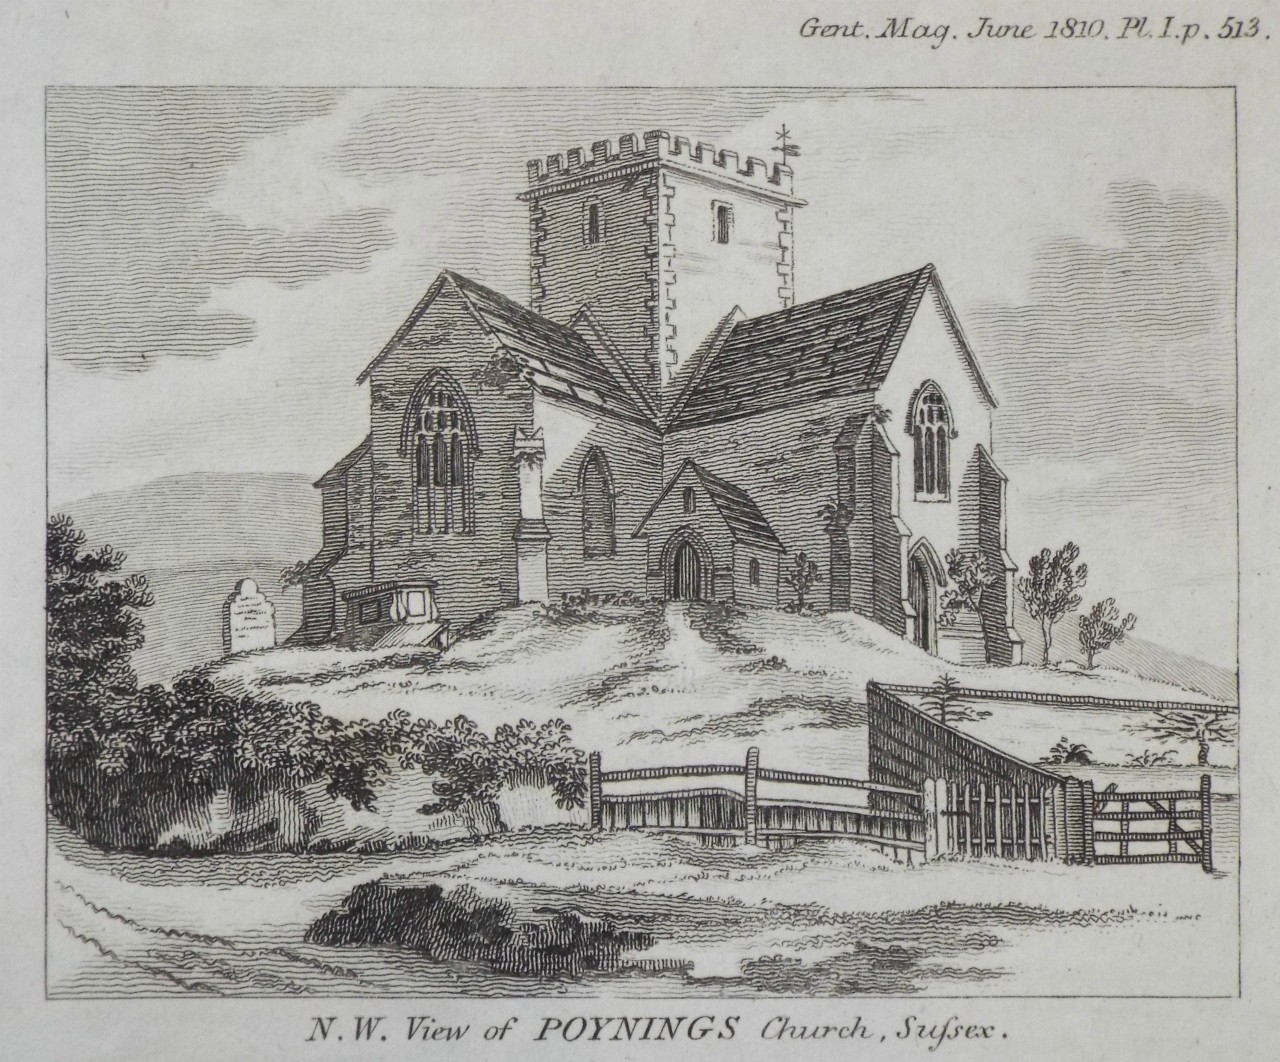 Print - N.W. View of Poynings Church, Sussex. - Cary